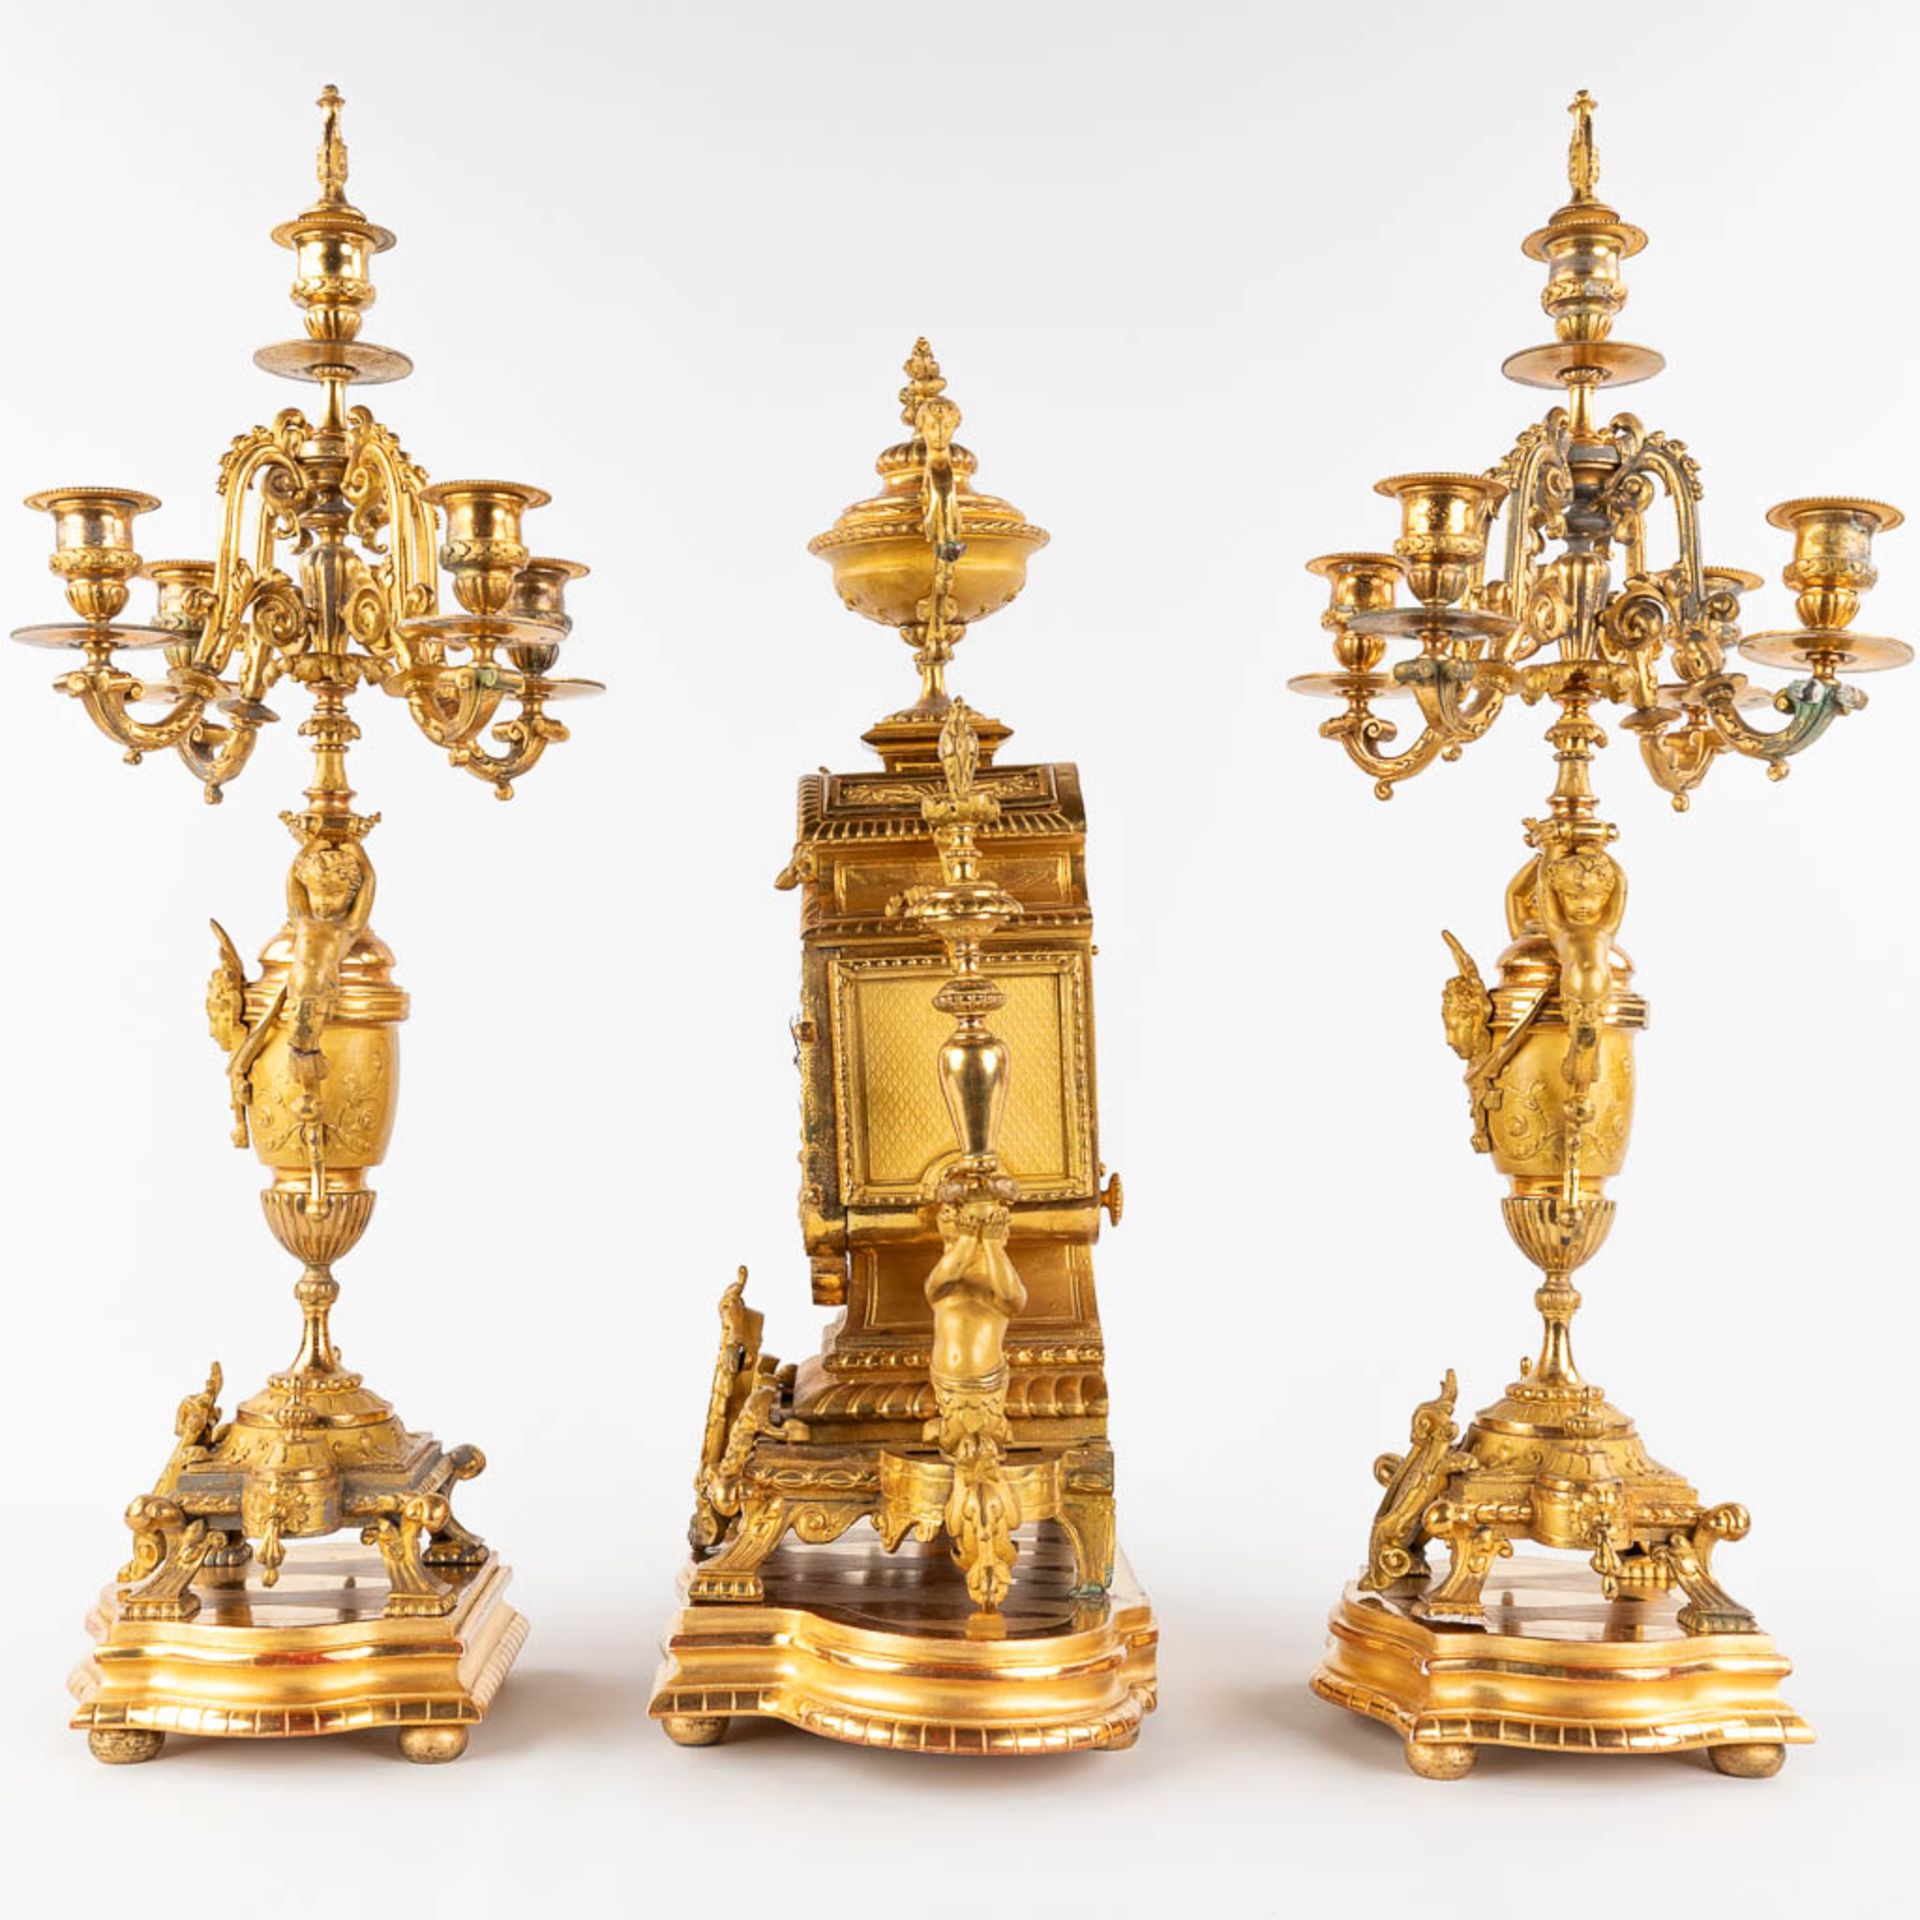 A three-piece mantle garniture clock and candelabra, gilt spelter, decorated with putti. Circa 1900. - Image 8 of 19